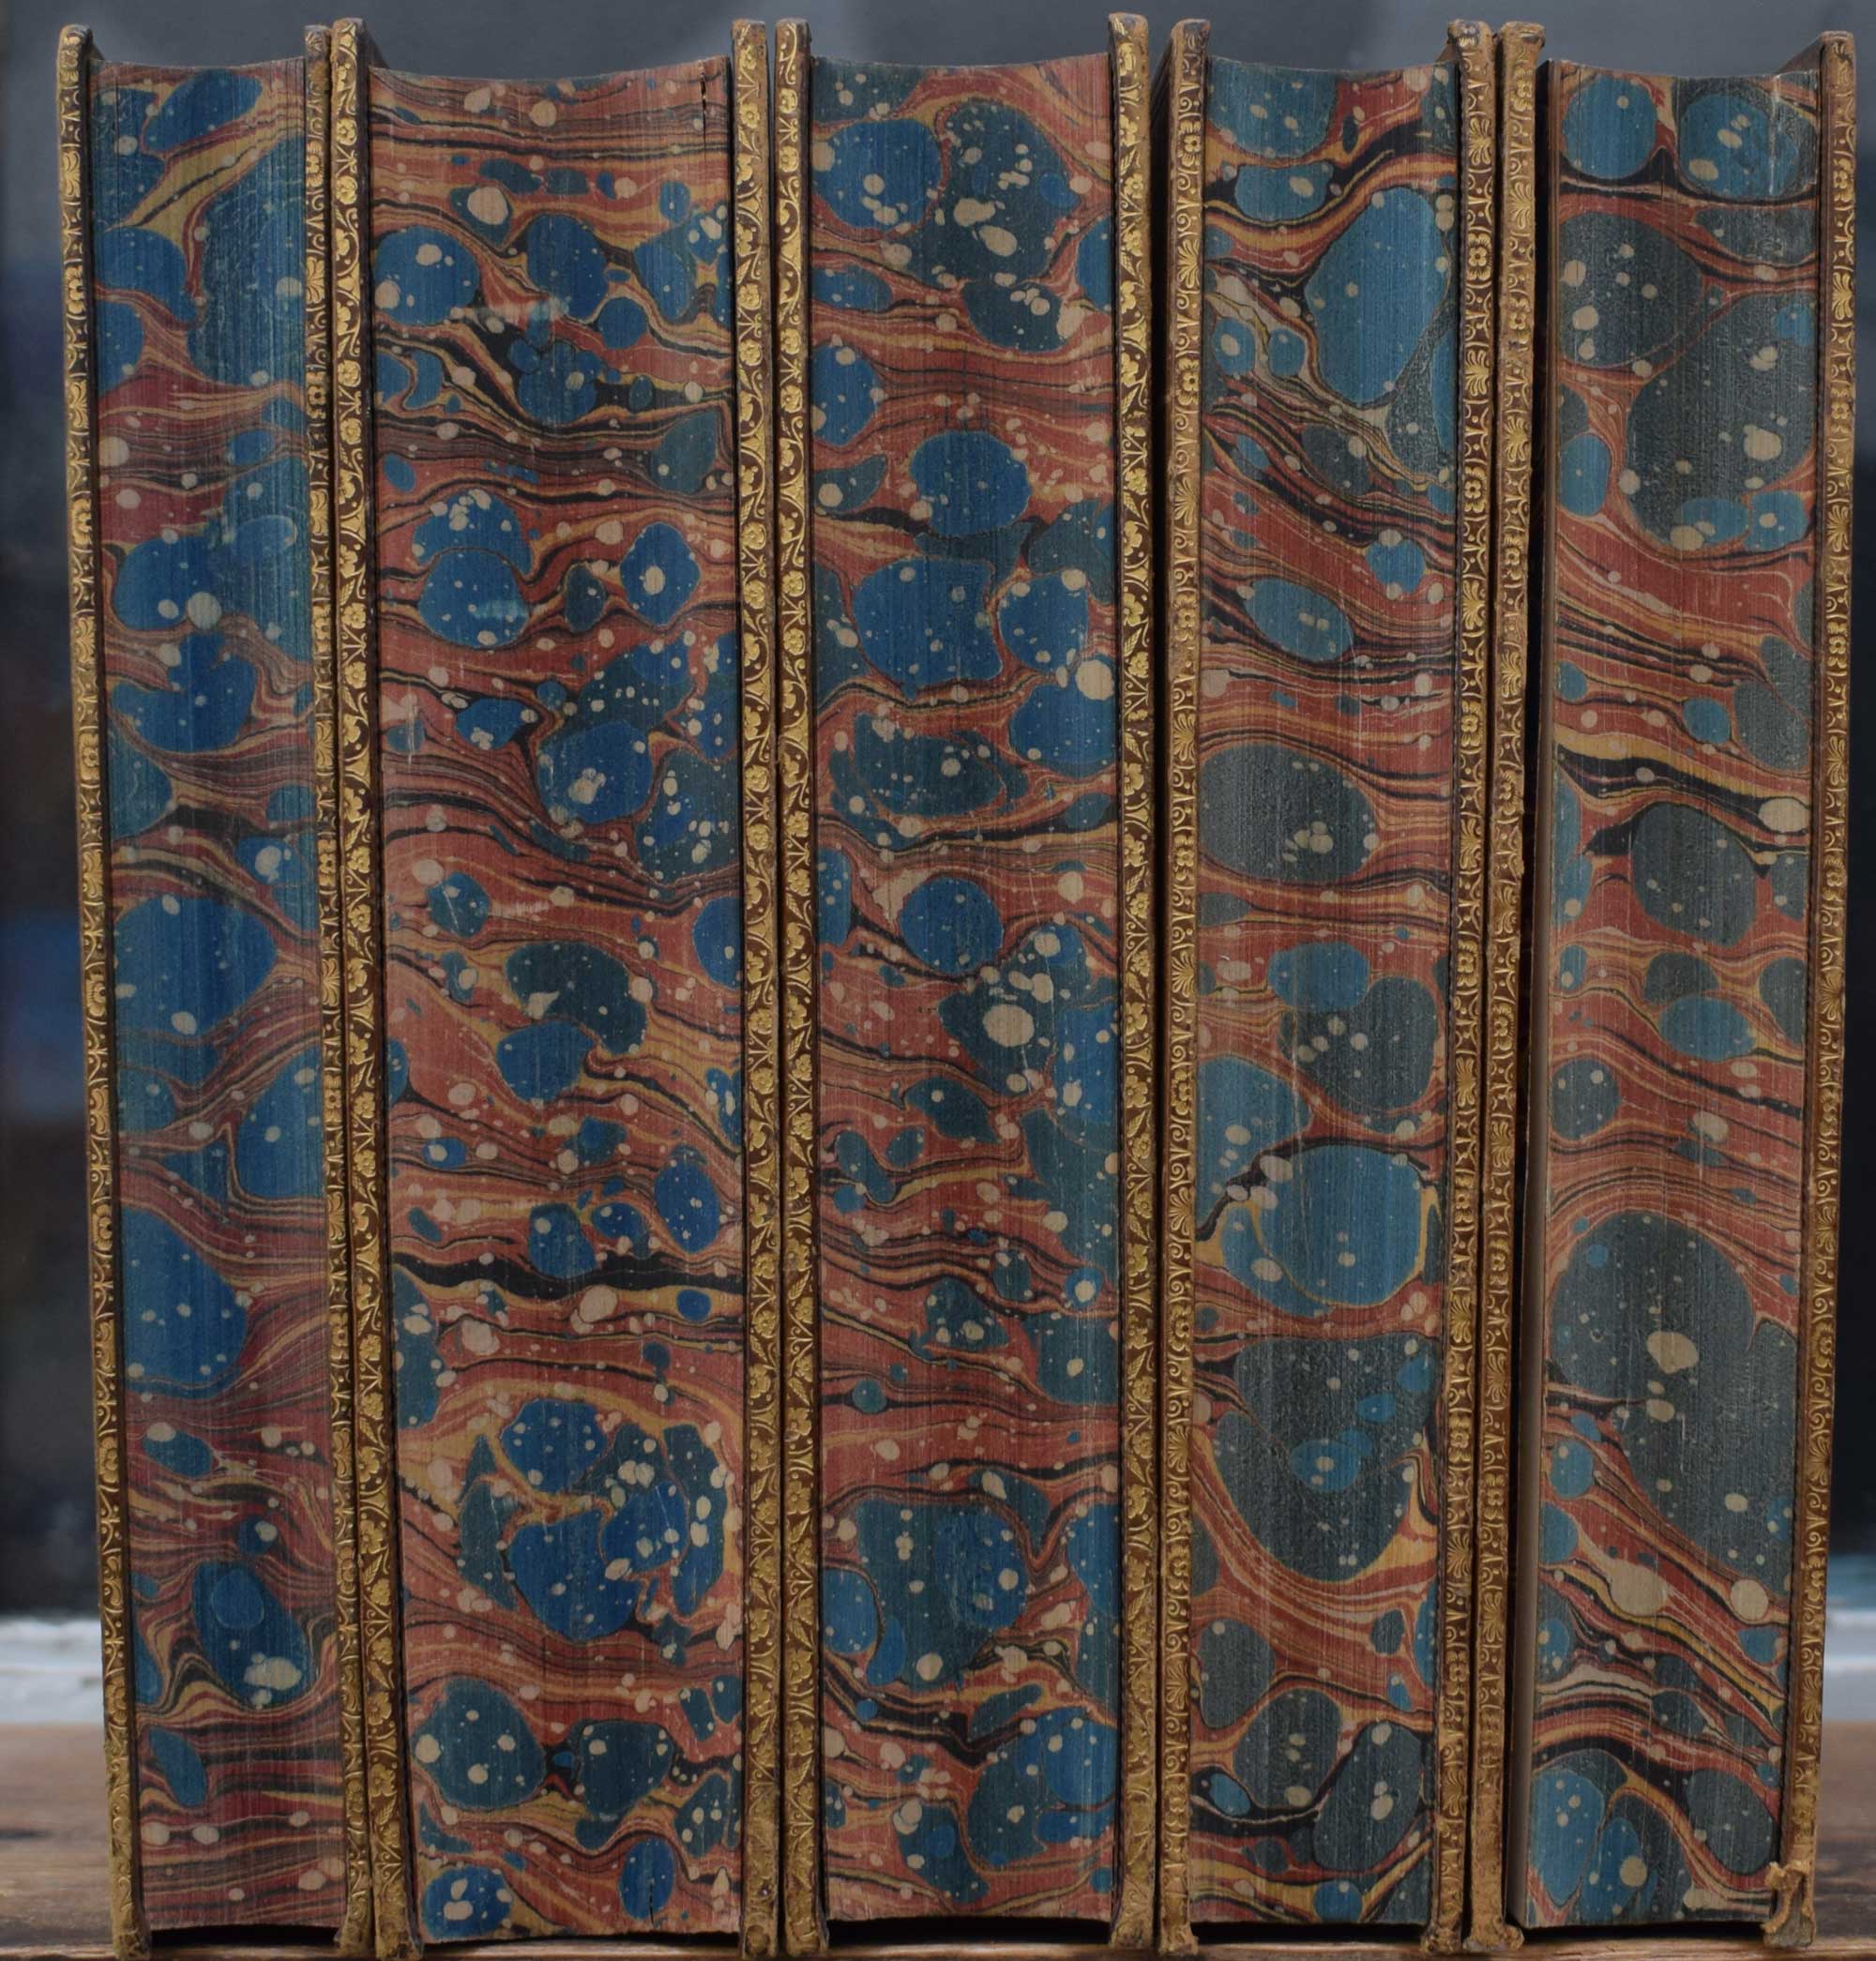 The History of England from the Accession of James the Second. 5 volume set. 1849. Longman edition.